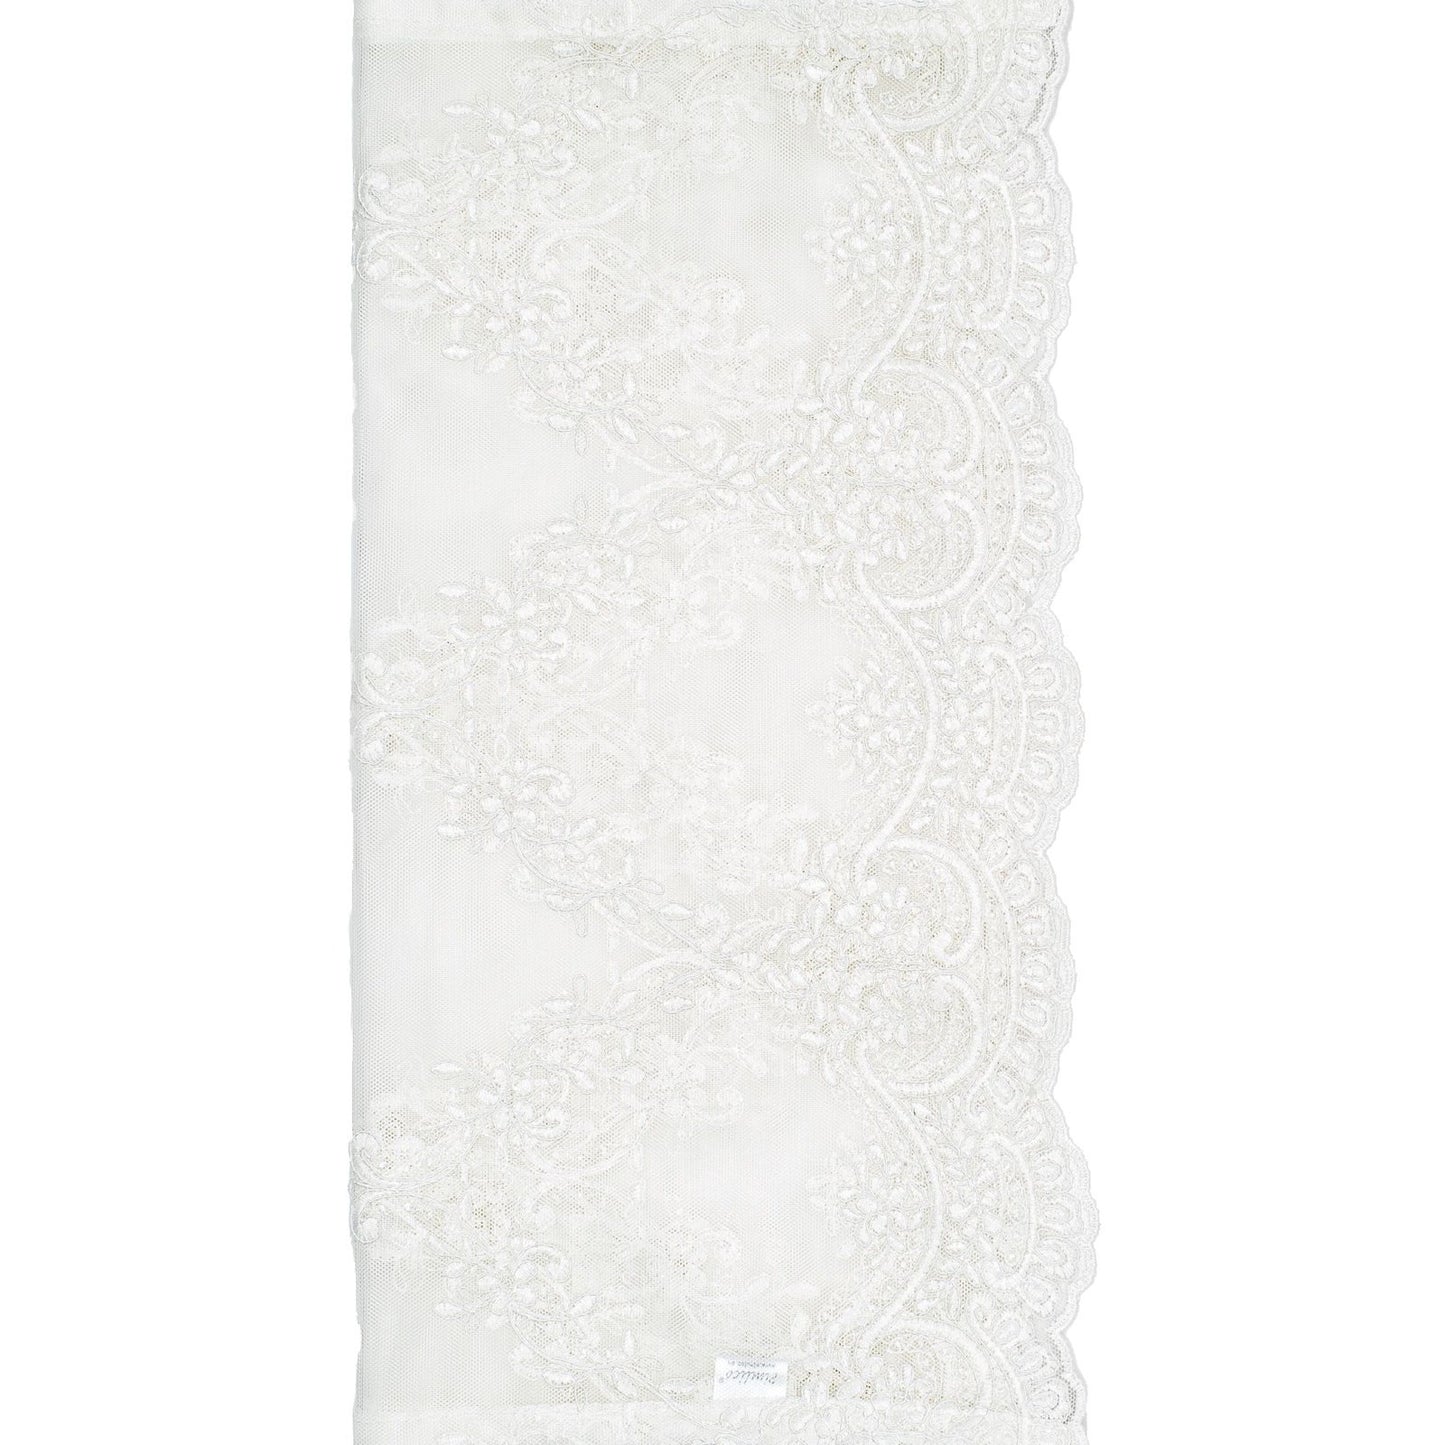 This elegant embroidered voile table runner is a perfect fit for any style setting from boho, design to romantic...your table will look fabulous. Dressing your table is a pleasure!